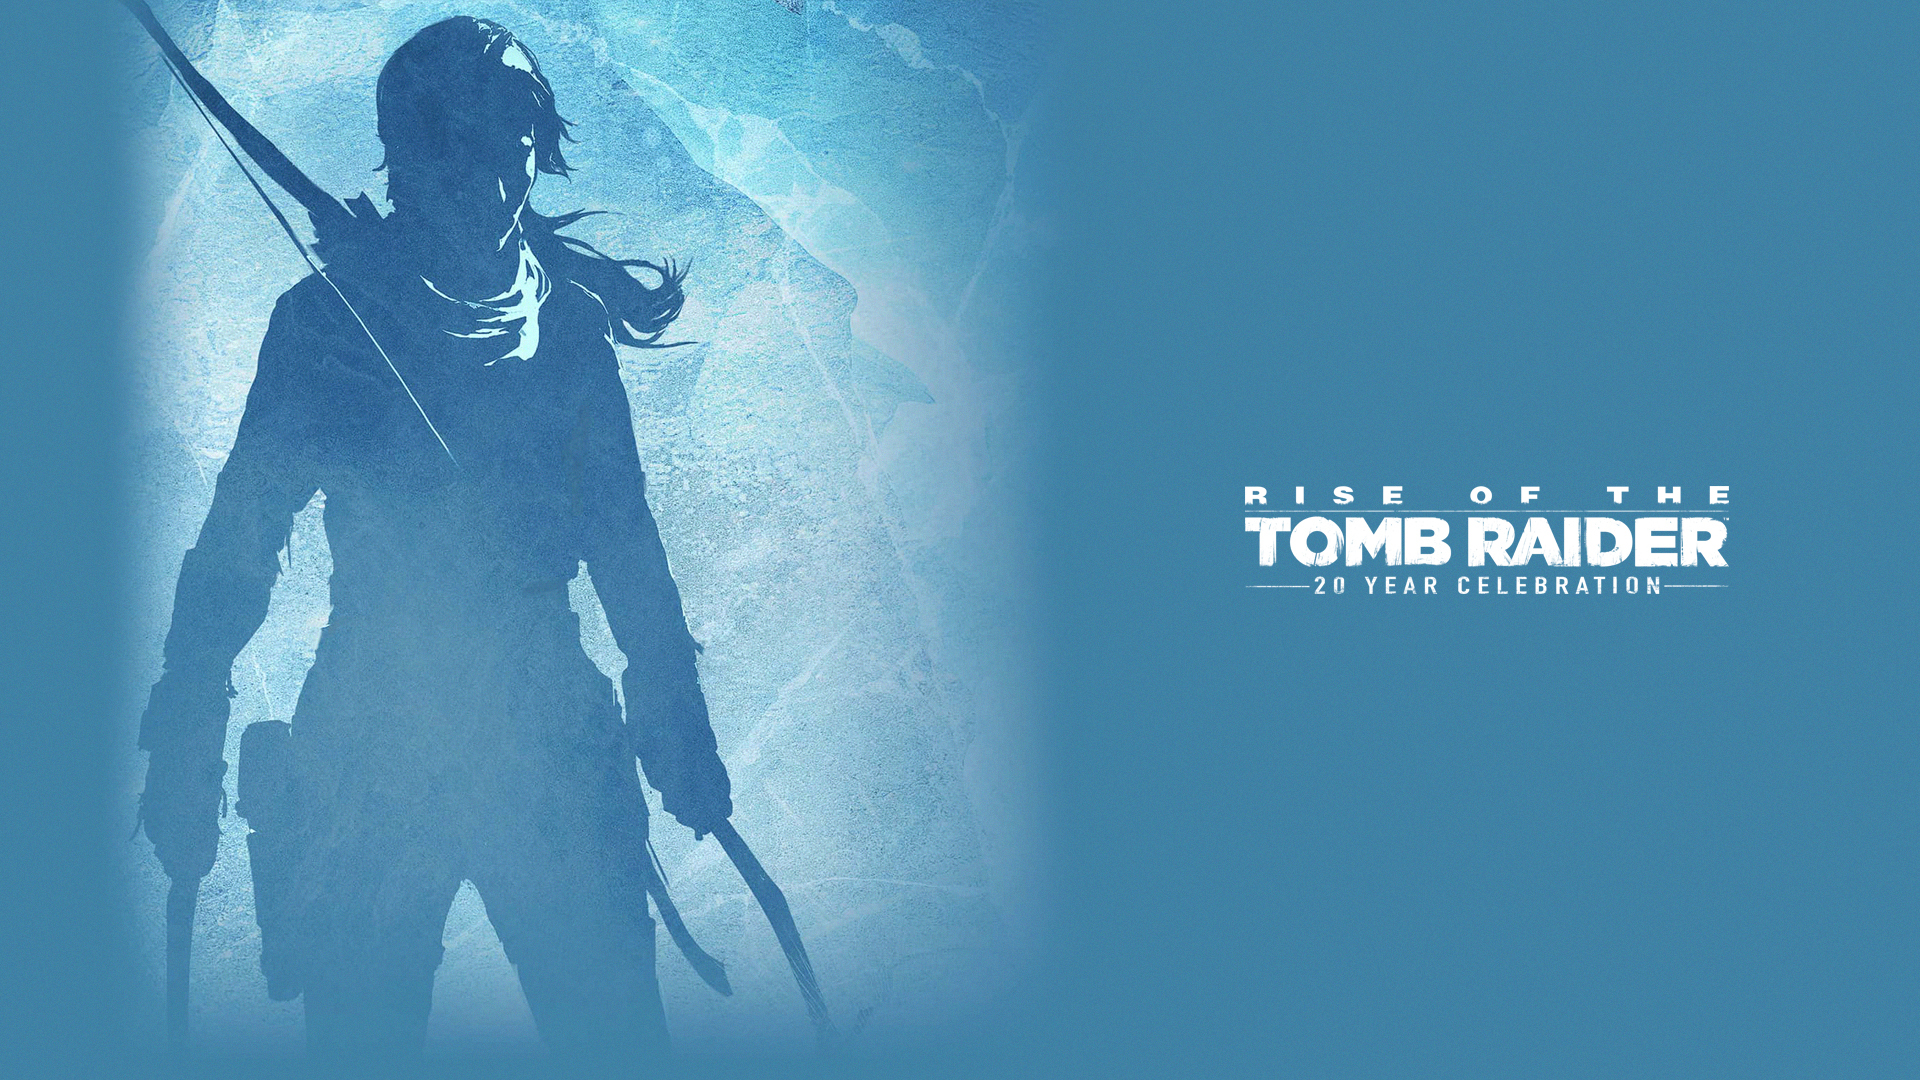 Tomb raider for steam фото 41